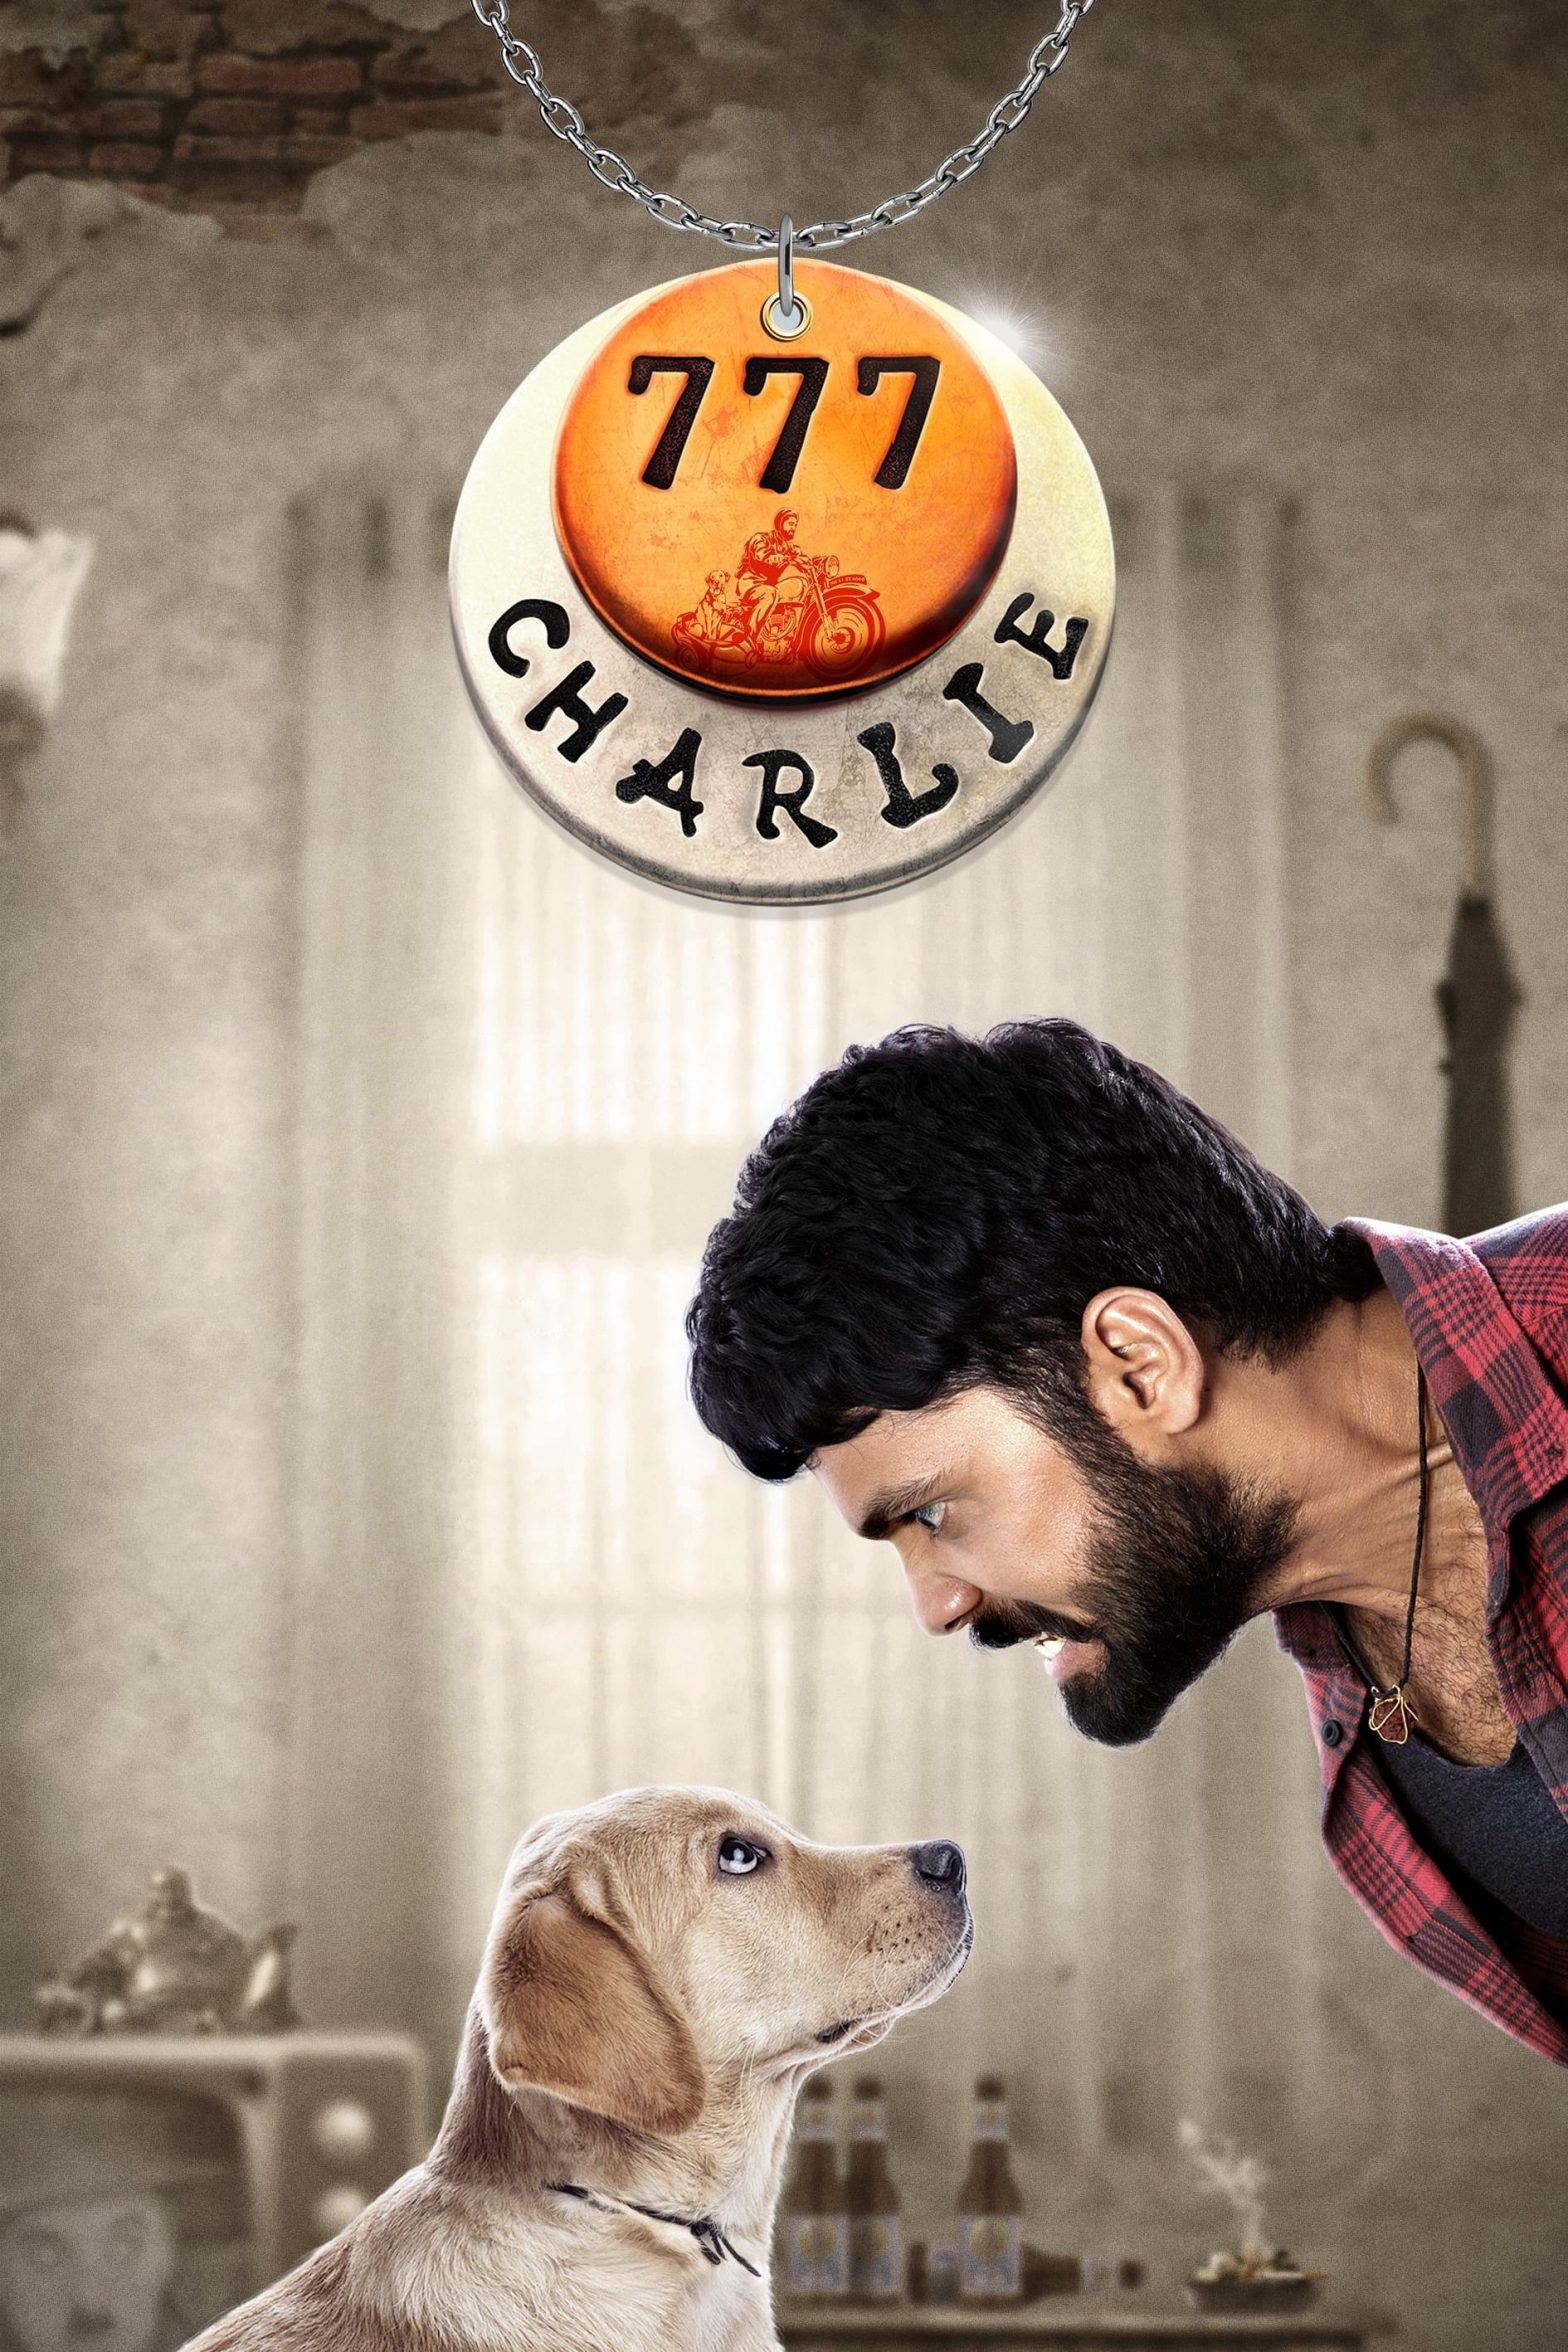 Poster for the movie "777 Charlie"